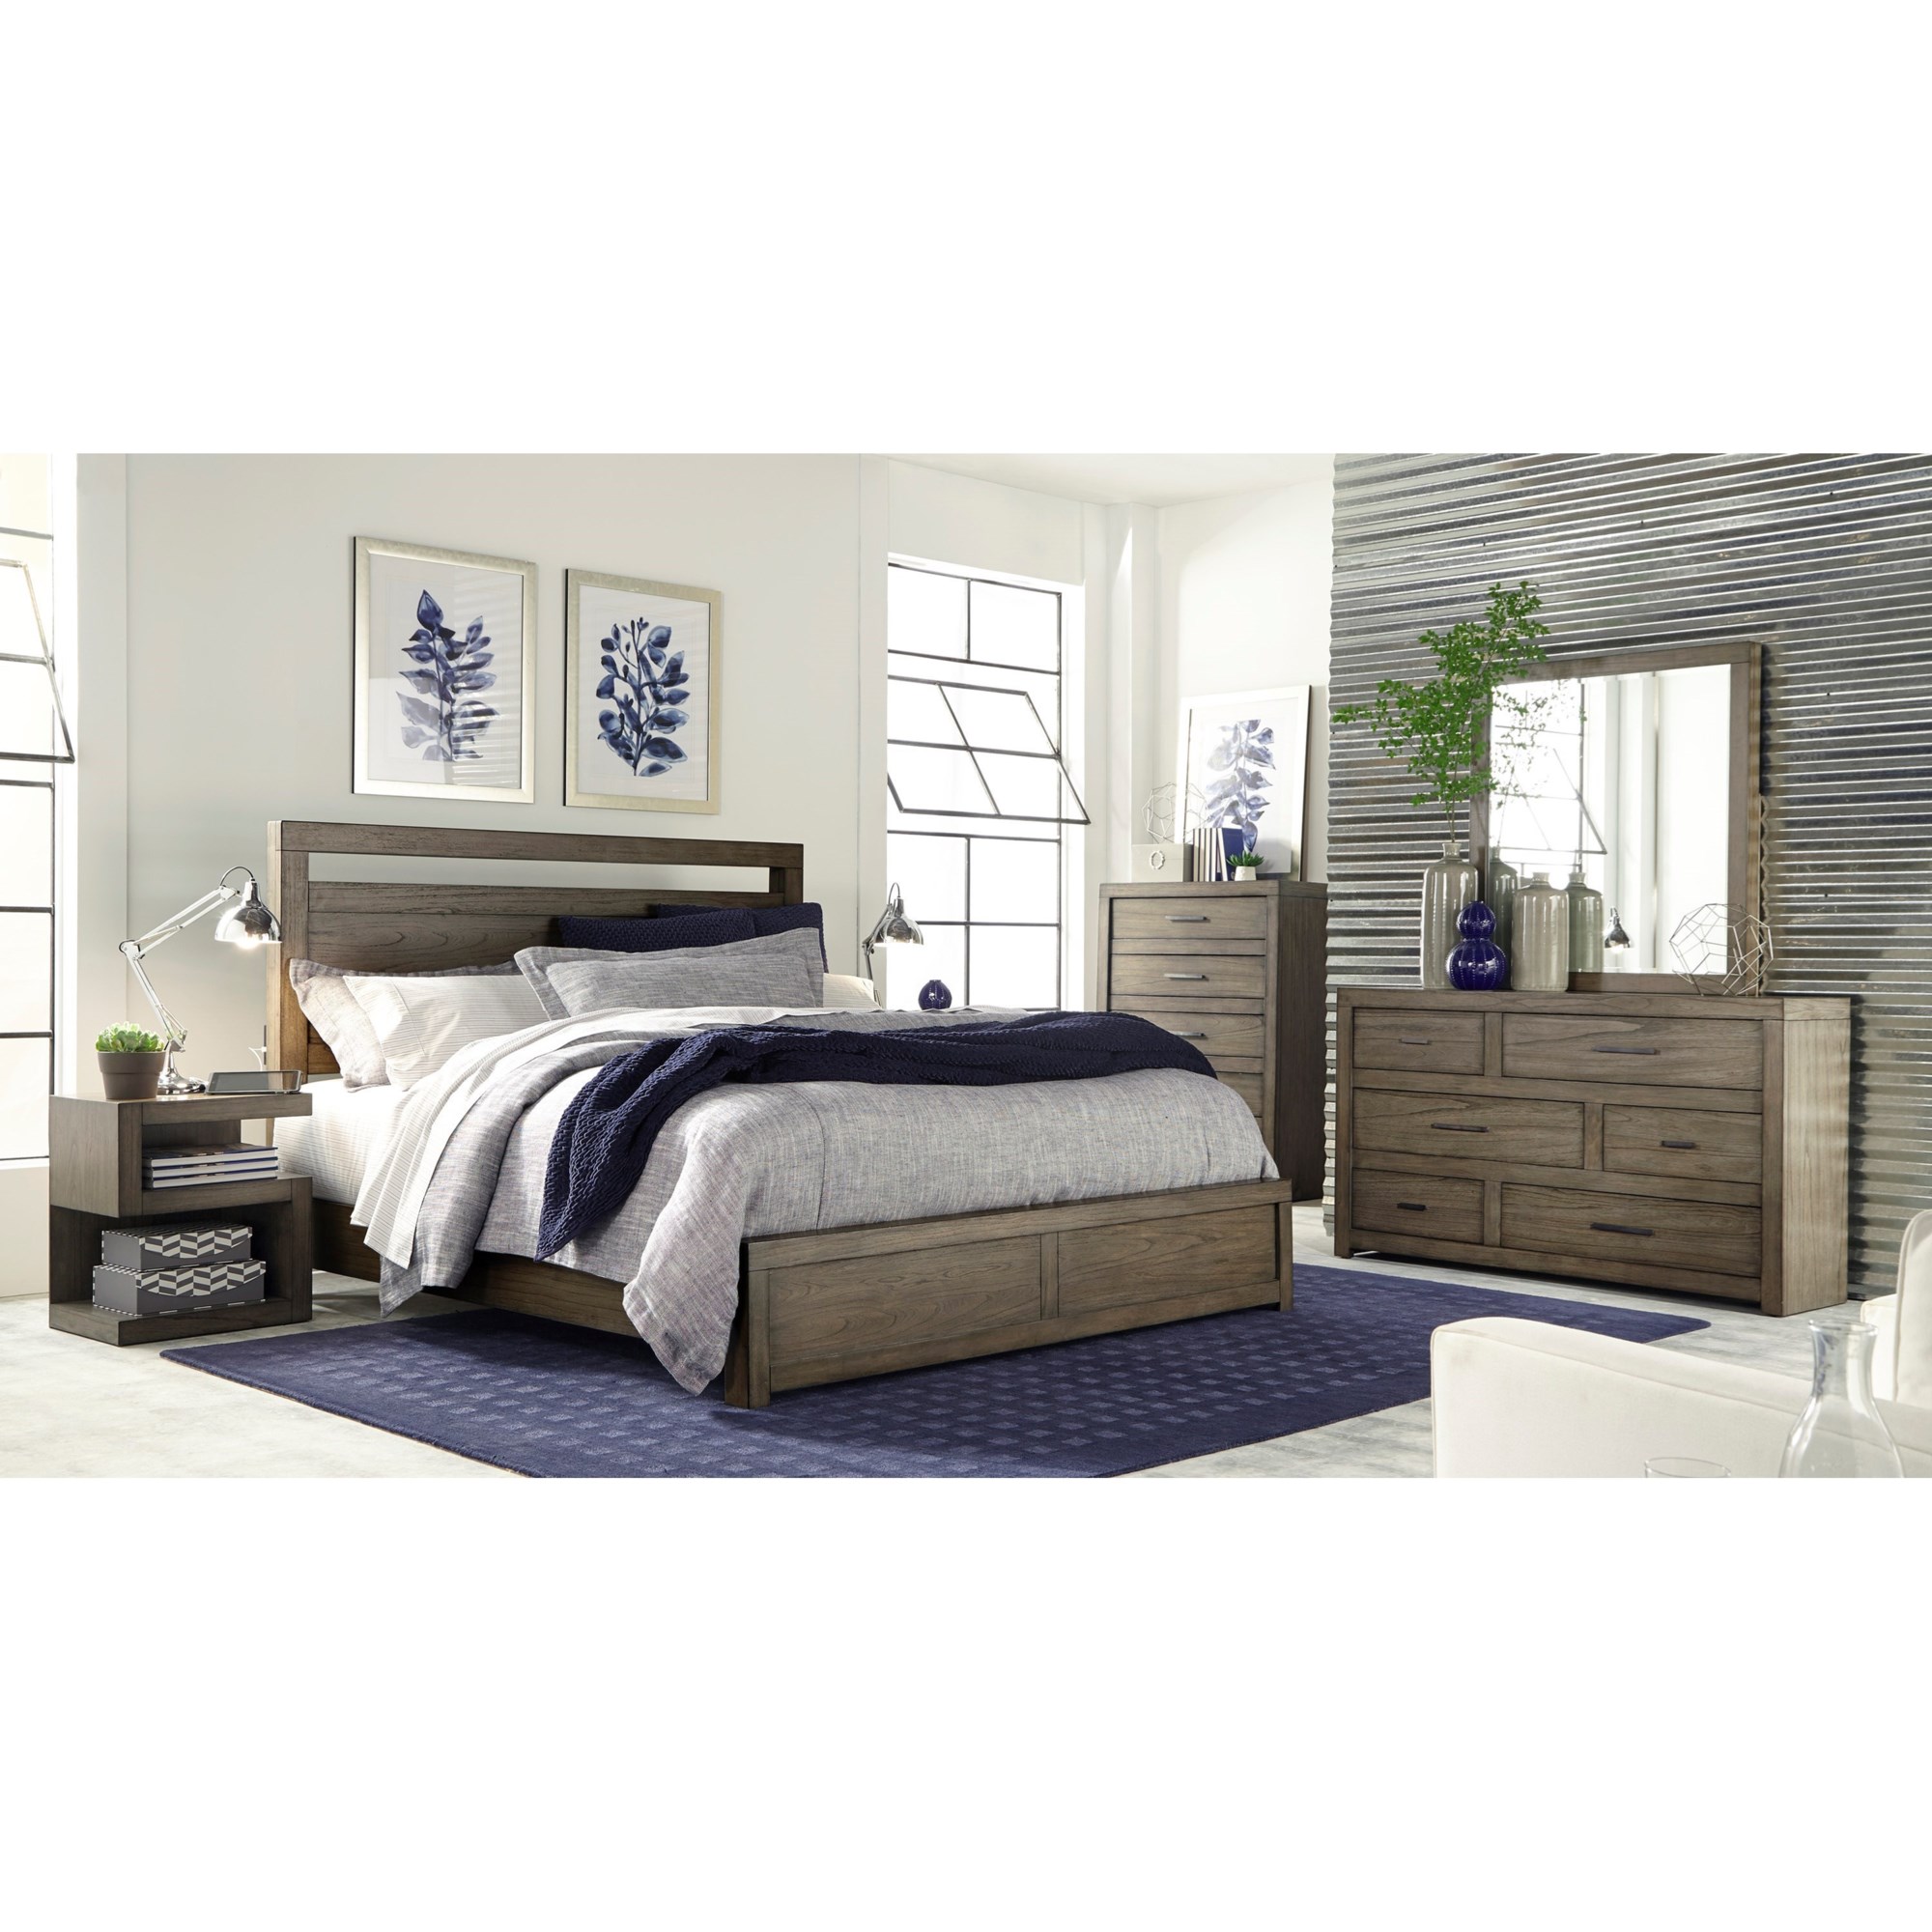 USB Profile Queen Platform Furniture Bed | Dual Aspenhome PKG412402 Modern with Loft Contemporary Ports - Panel Bed | Bed or Belfort Low